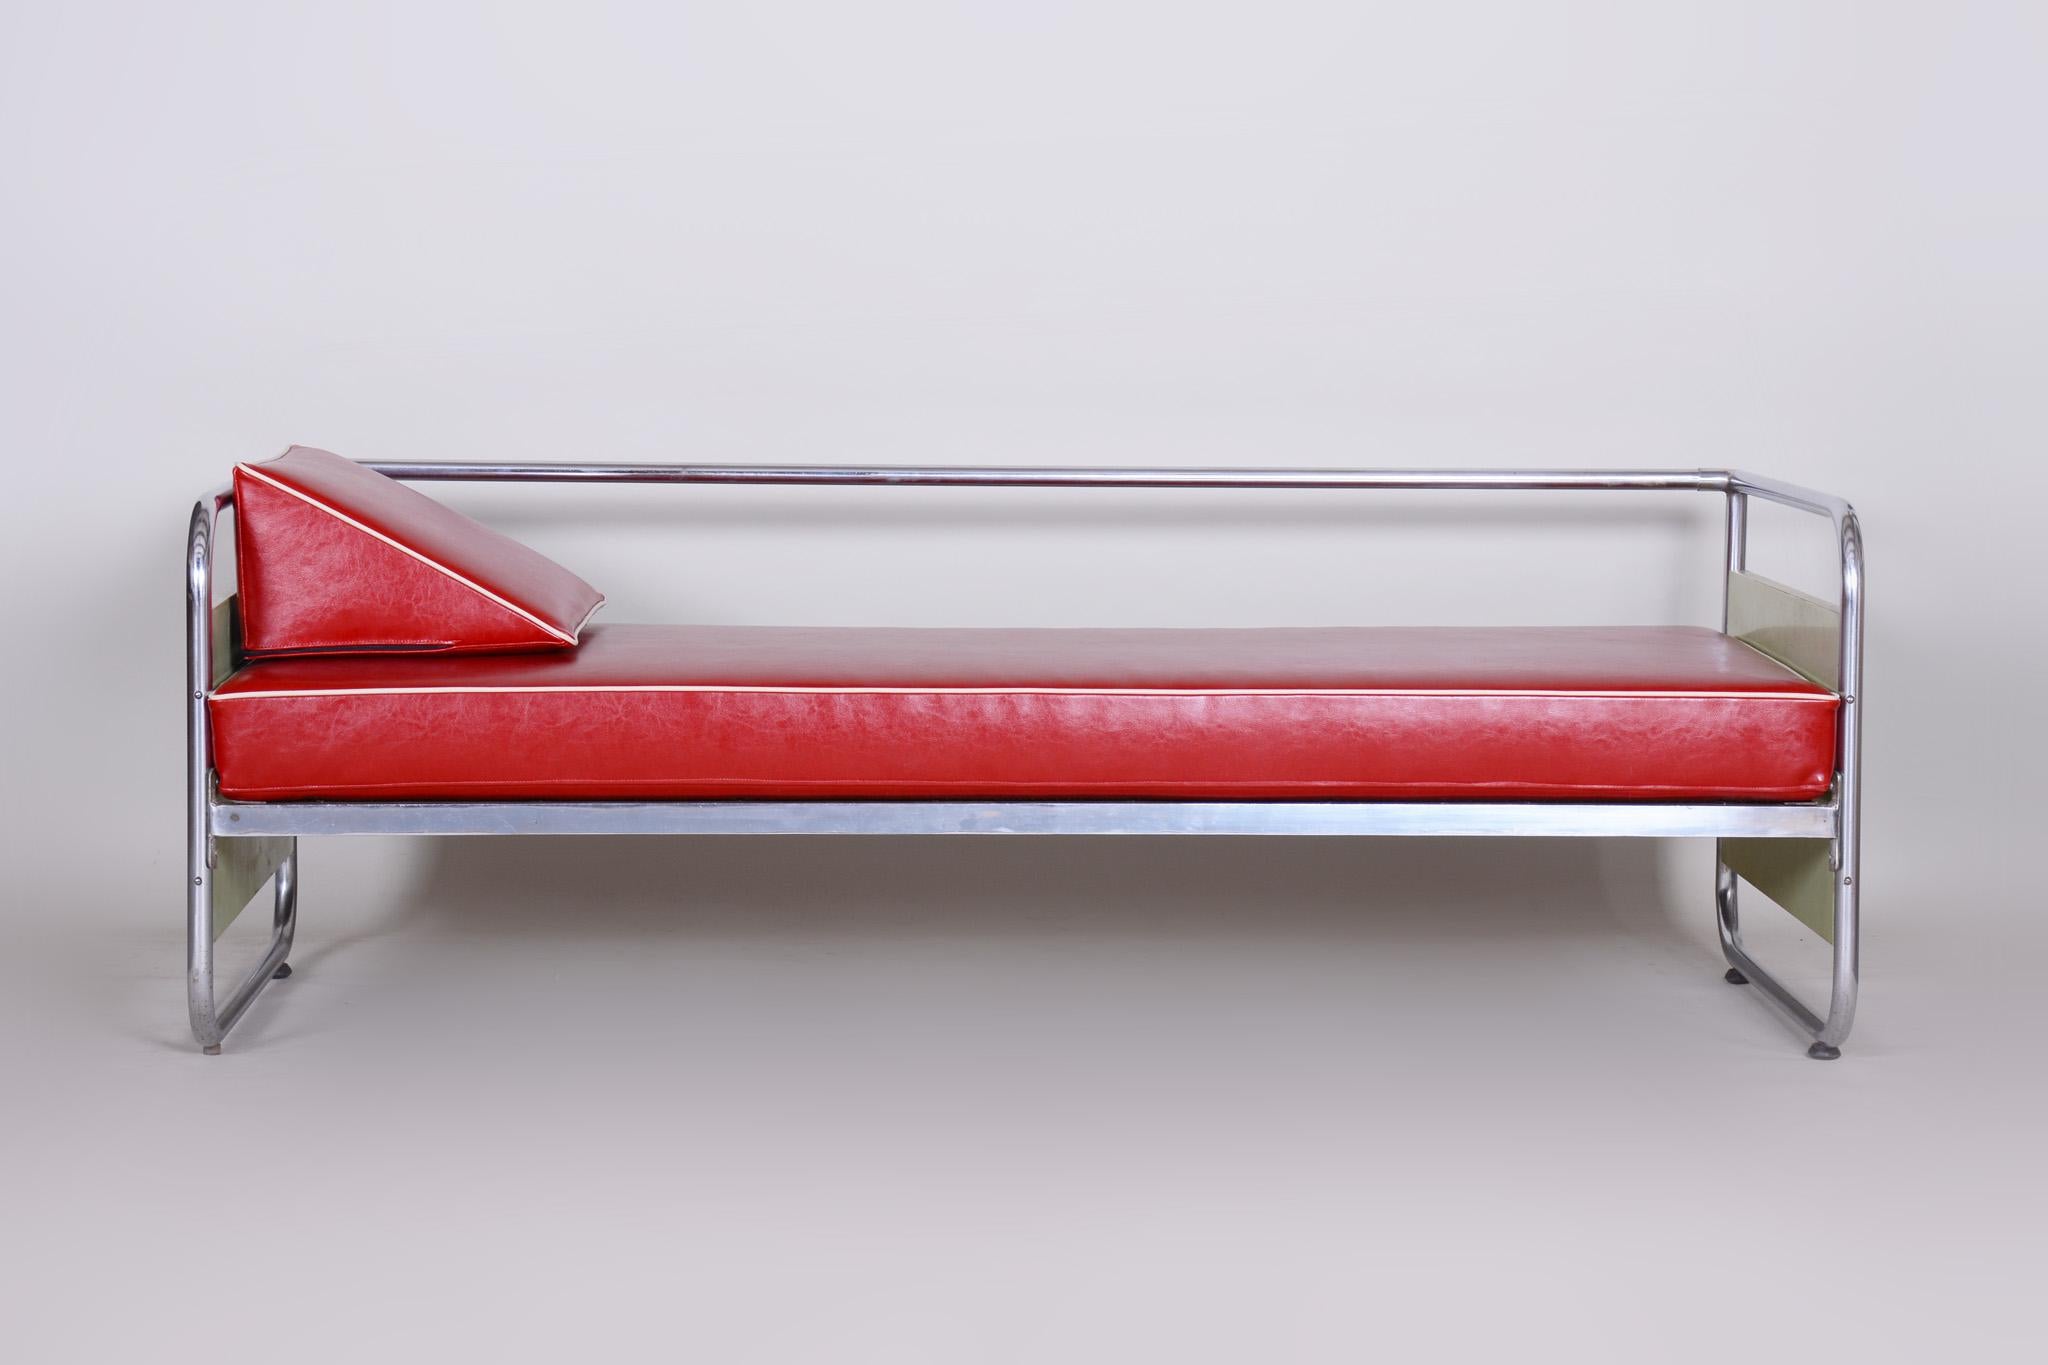 Bauhaus style sofa with chrome tubular steel frame.
Manufactured by Vichr a Spol in the 1930s.
Chrome tubular steel is in perfect original condition.
Upholstered to high quality leather
Source: Czechia (Czechoslovakia).